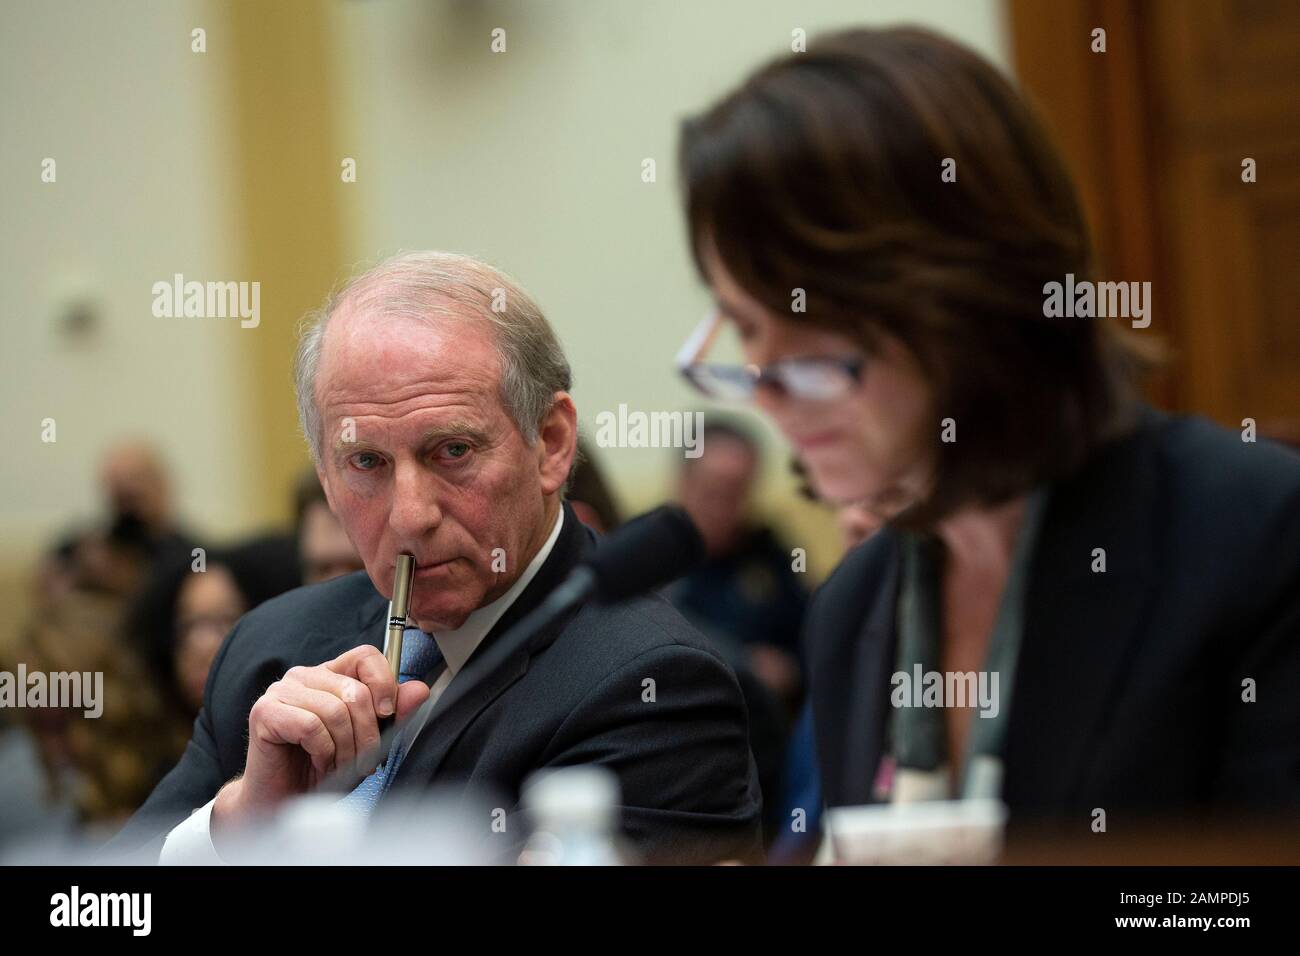 Richard Haass Ph.D., President of the Council on Foreign Relations, Avril Haines, Former Deputy National Security Advisor and Former Deputy Director of the Central Intelligence Agency, and Stephen J. Hadley, Former National Security Advisor, testify before the U.S. House Committee on Foreign Relations at the United States Capitol in Washington, DC, U.S., on Tuesday, January 14, 2020, following a U.S., drone strike that killed Iranian military leader Qasem Soleimani on January 3, 2020. United States Secretary of State Mike Pompeo, who was supposed to be the key witness appearing before the co Stock Photo